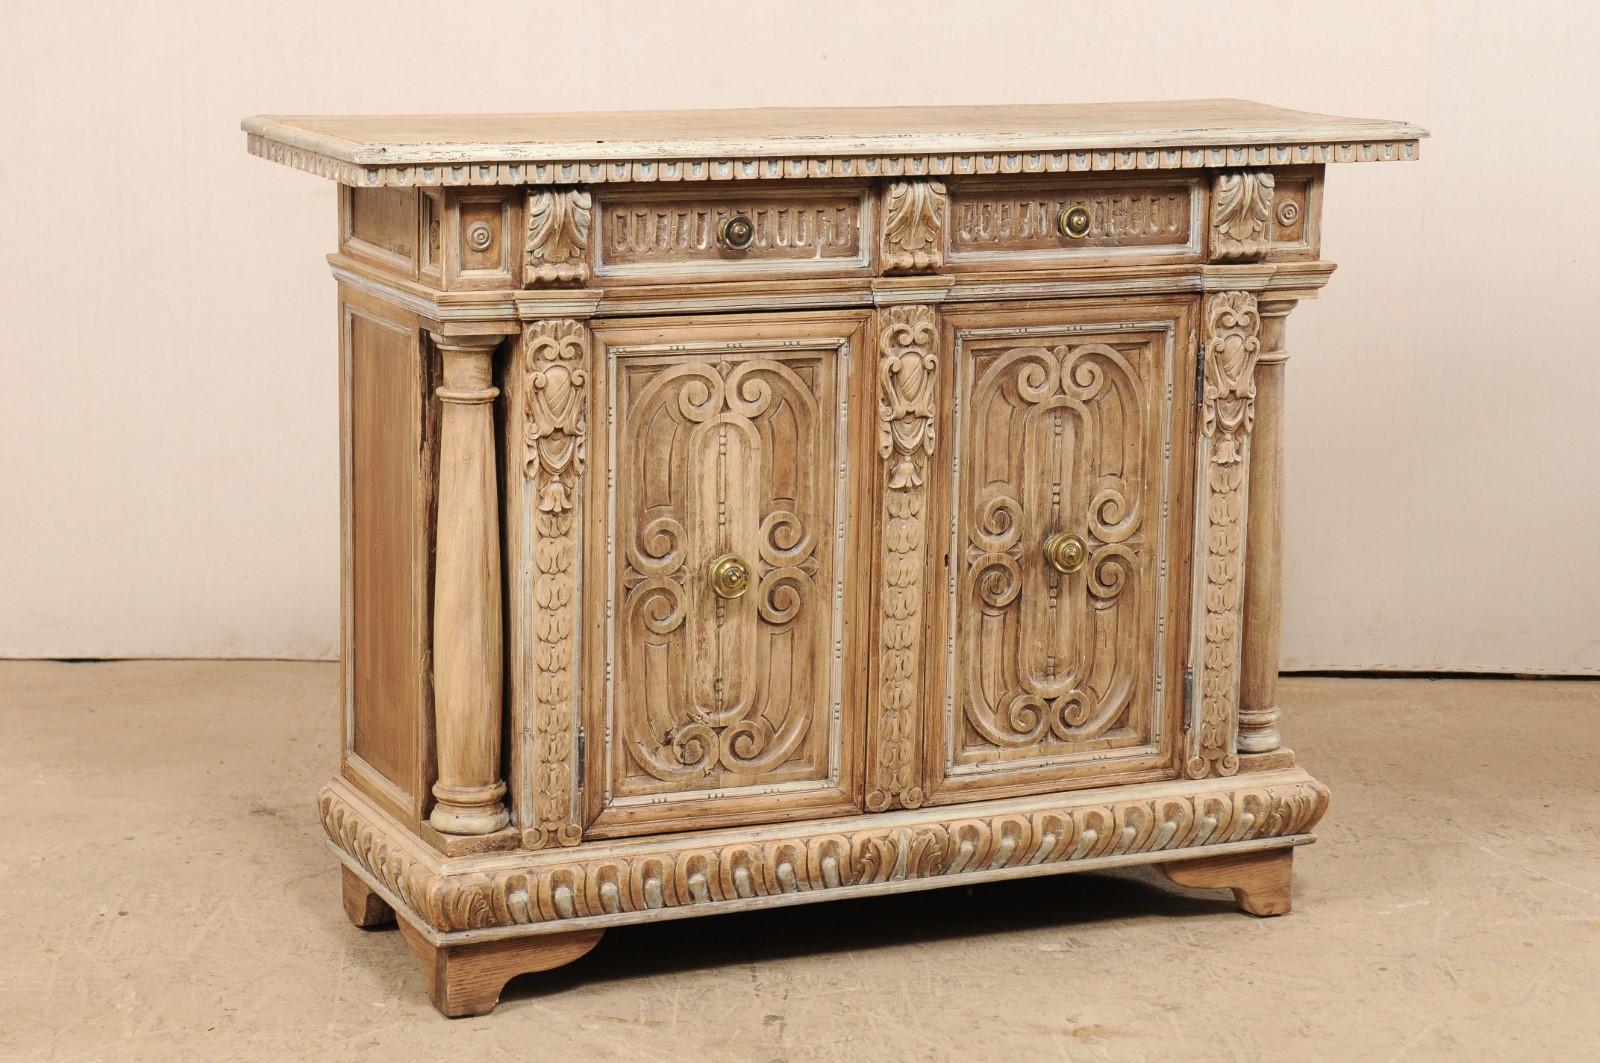 An Italian credenza console with intricate carved details from the 19th century. This antique buffet cabinet from Italy is elaborately carved with various egg-and-dart, foliage, and scrolling motifs. The rectangular-shaped top overhangs the